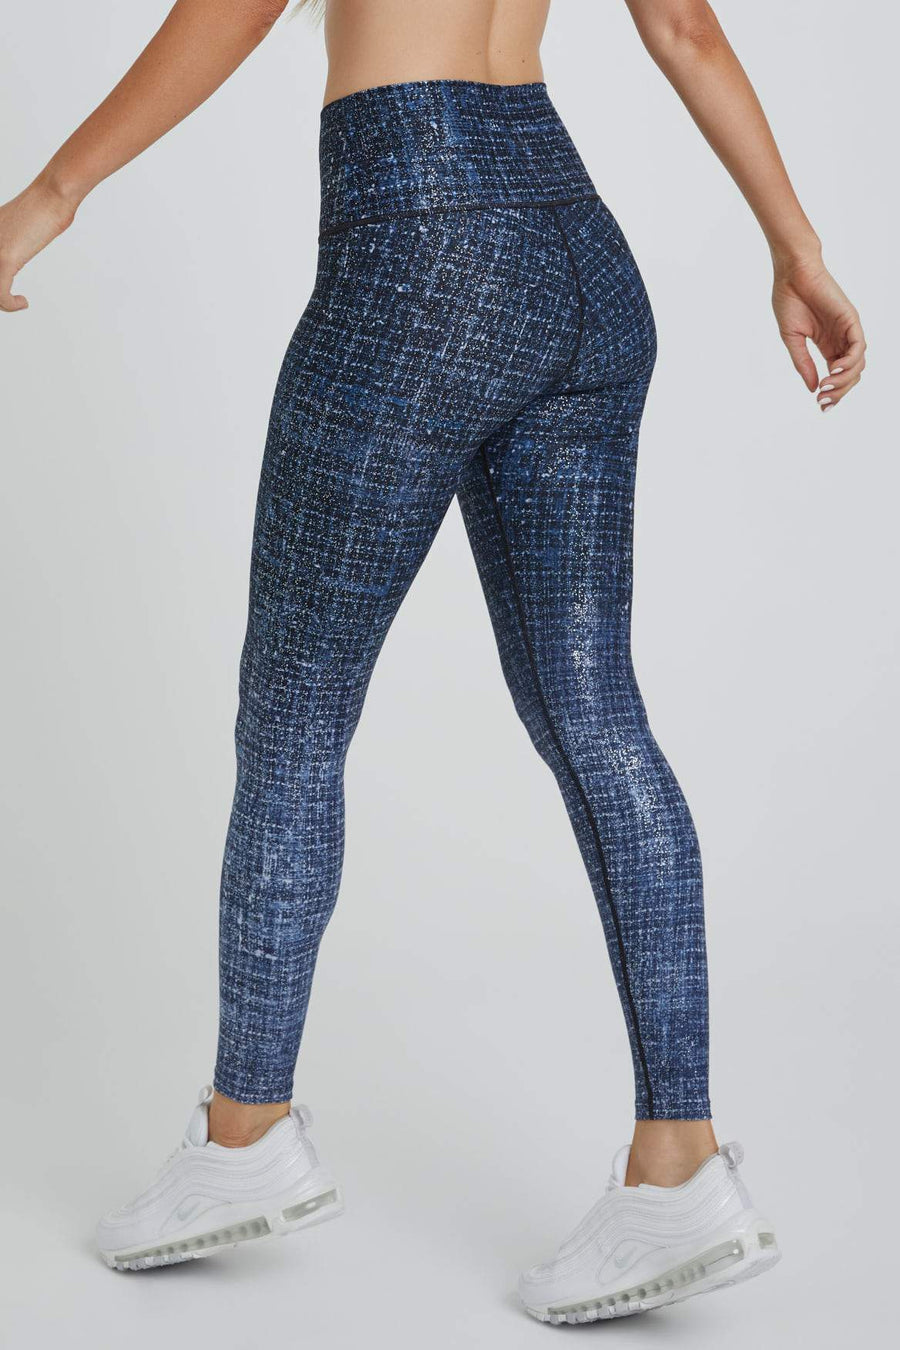 High Waisted Leggings Navy Tweed With Foil